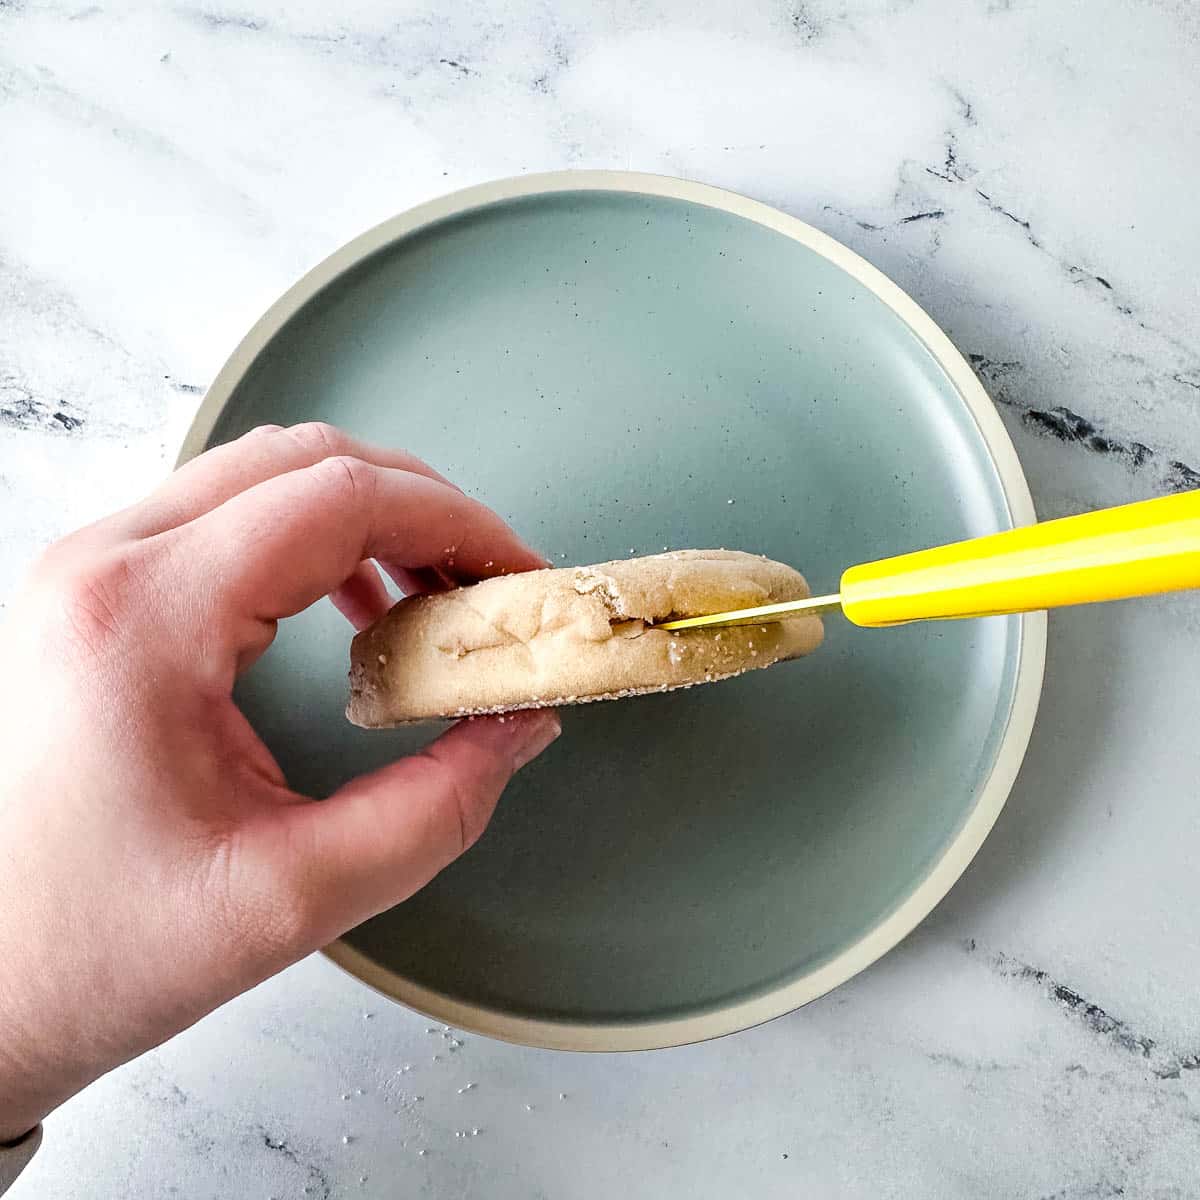 An English muffin is split with a yellow paring knife.